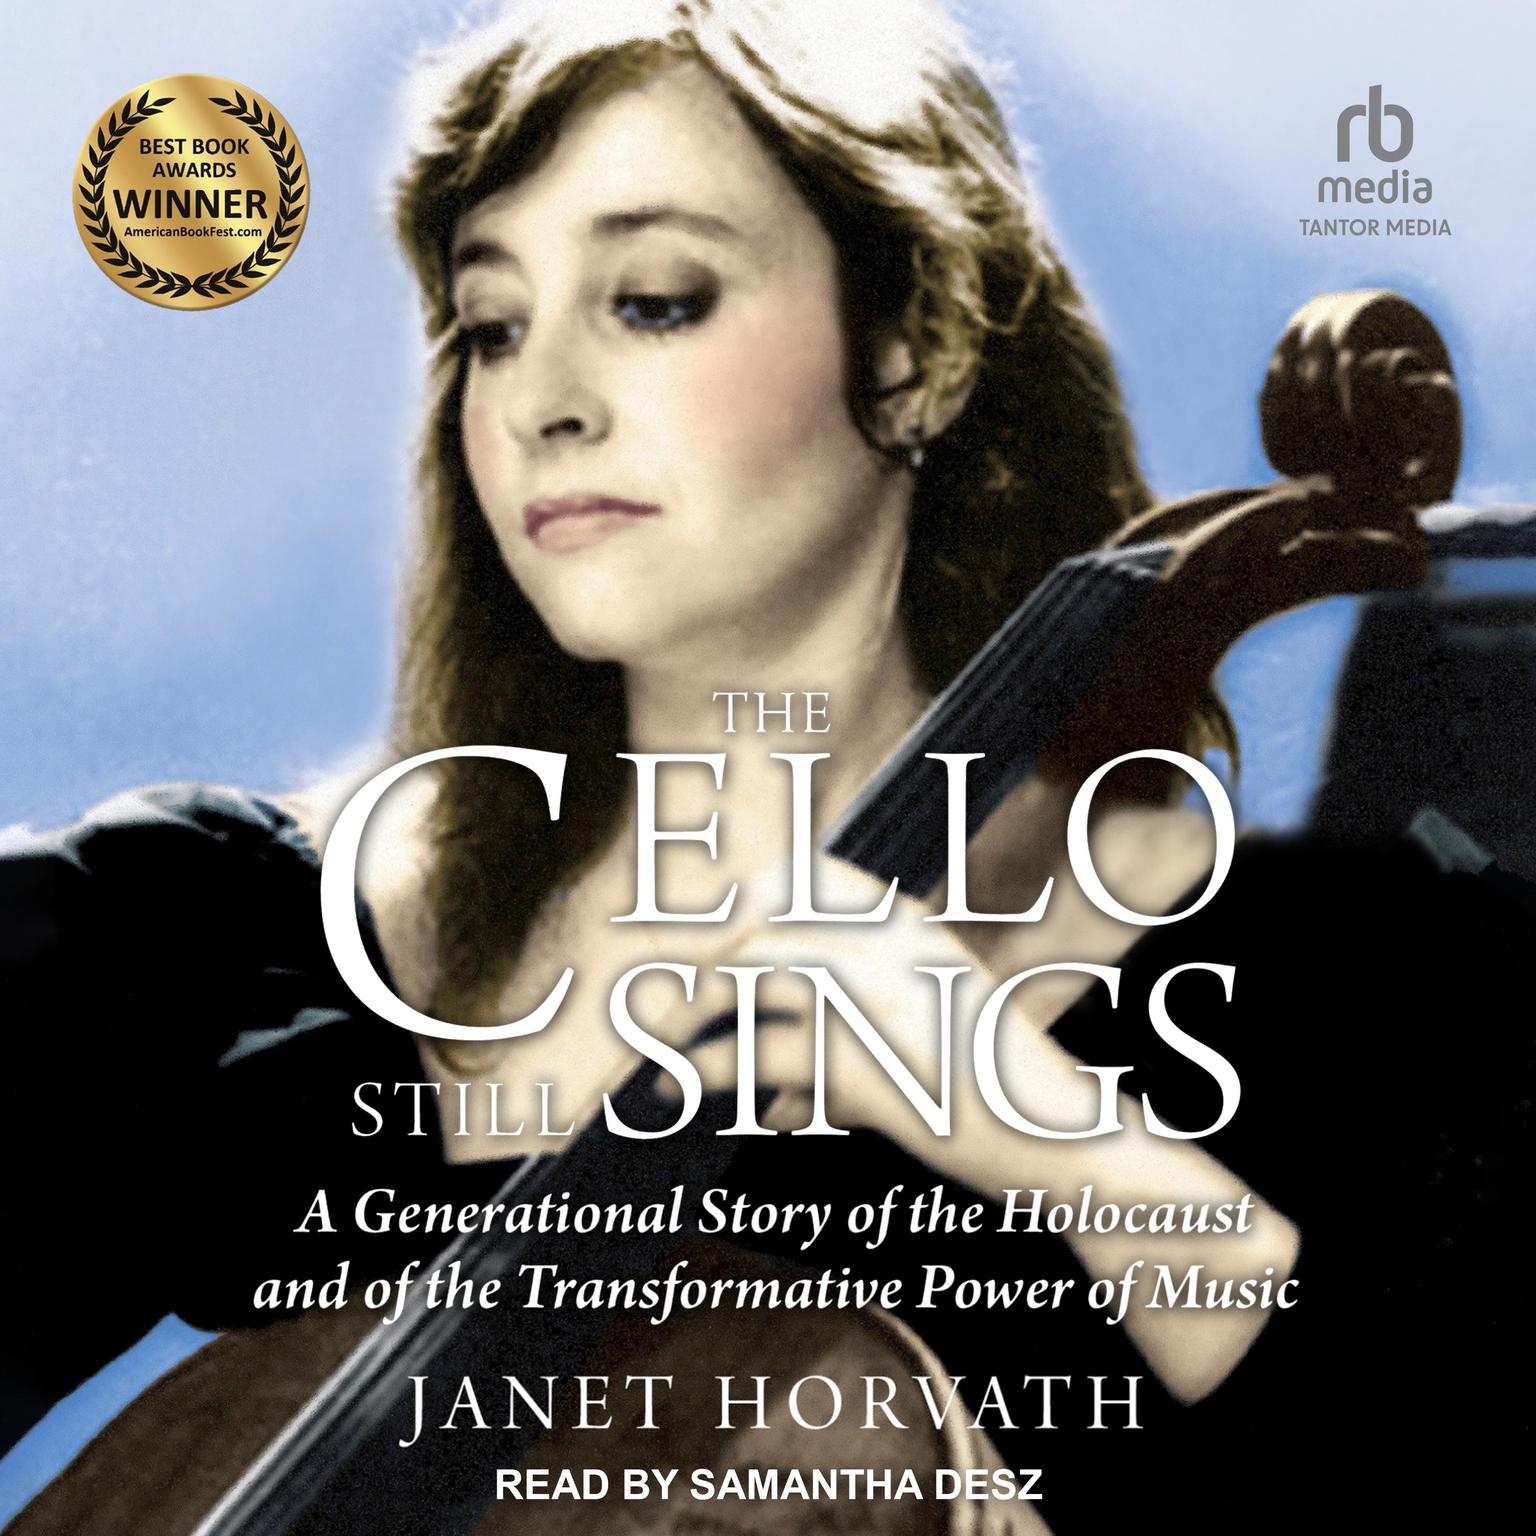 The Cello Still Sings: A Generational Story of the Holocaust and of the Transformative Power of Music Audiobook, by Janet Horvath